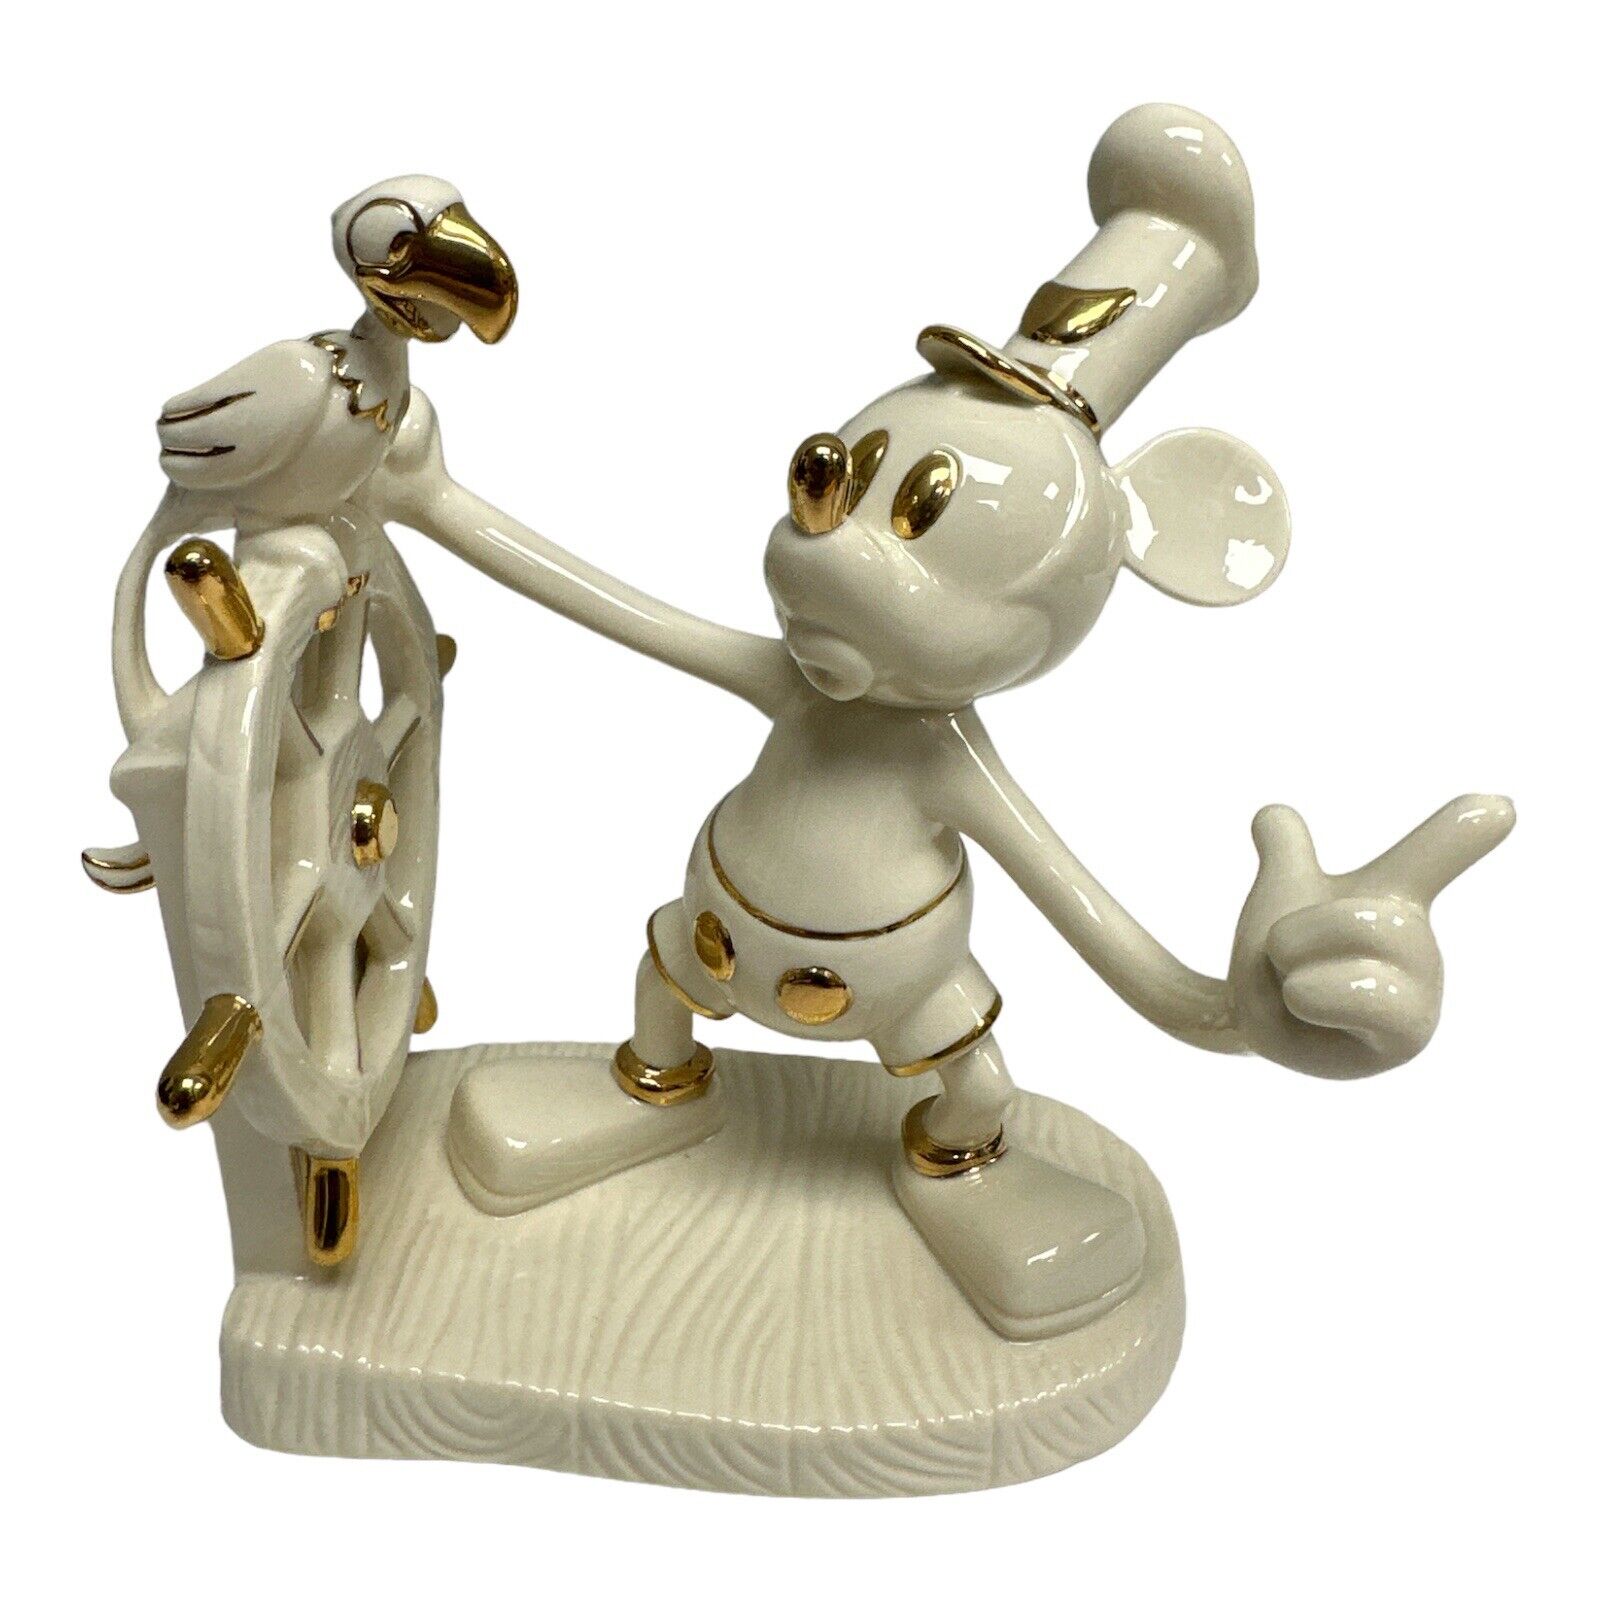 MICKEY MOUSE STEAMBOAT WILLIE FIGURINE 6” LENOX Disney Showcase  White & Gold